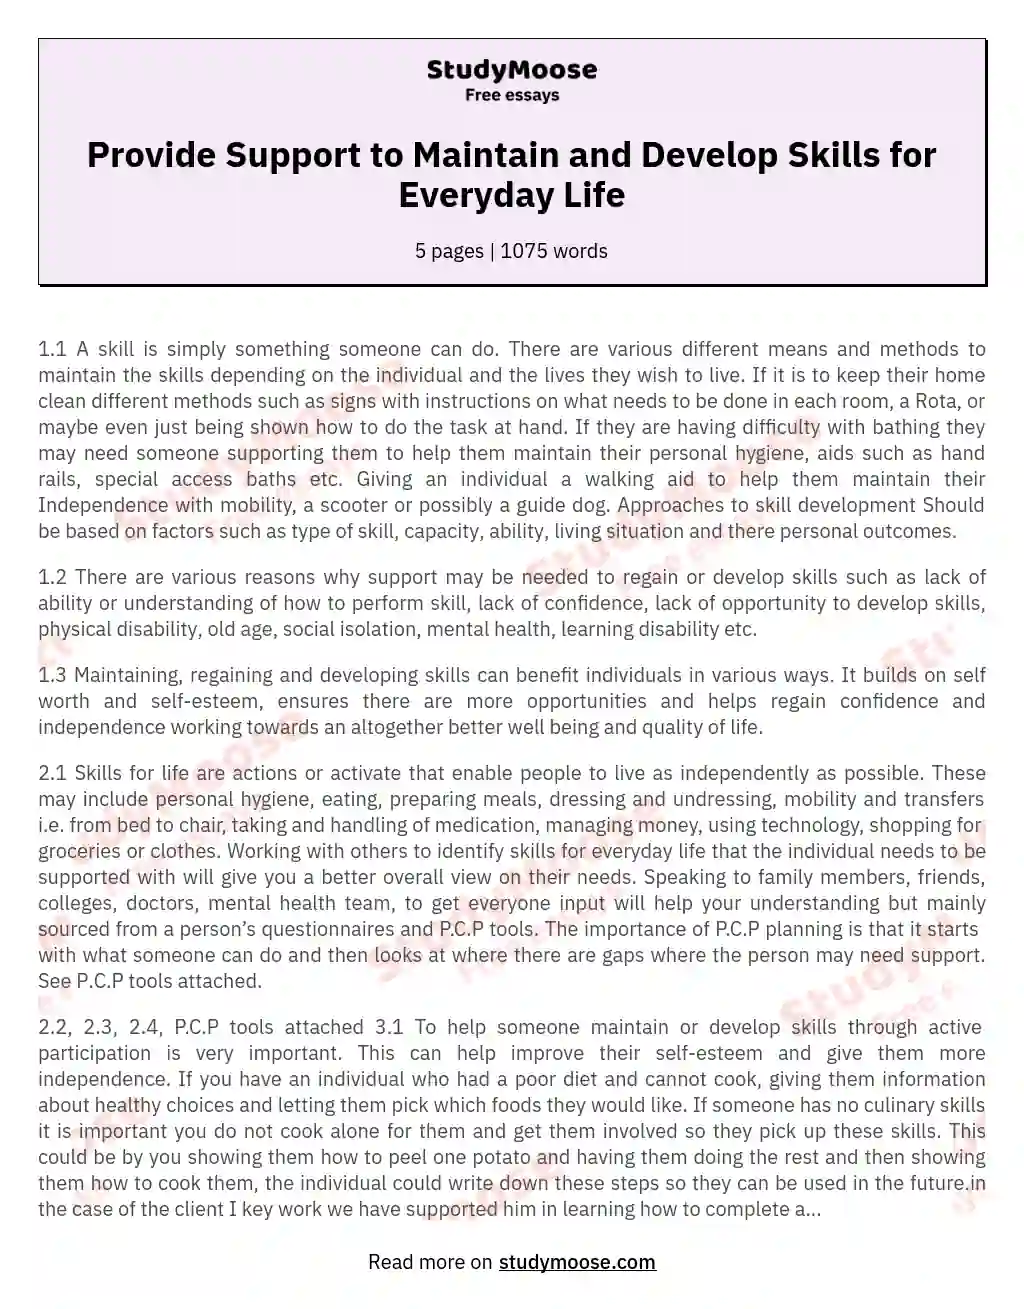 Provide Support to Maintain and Develop Skills for Everyday Life essay